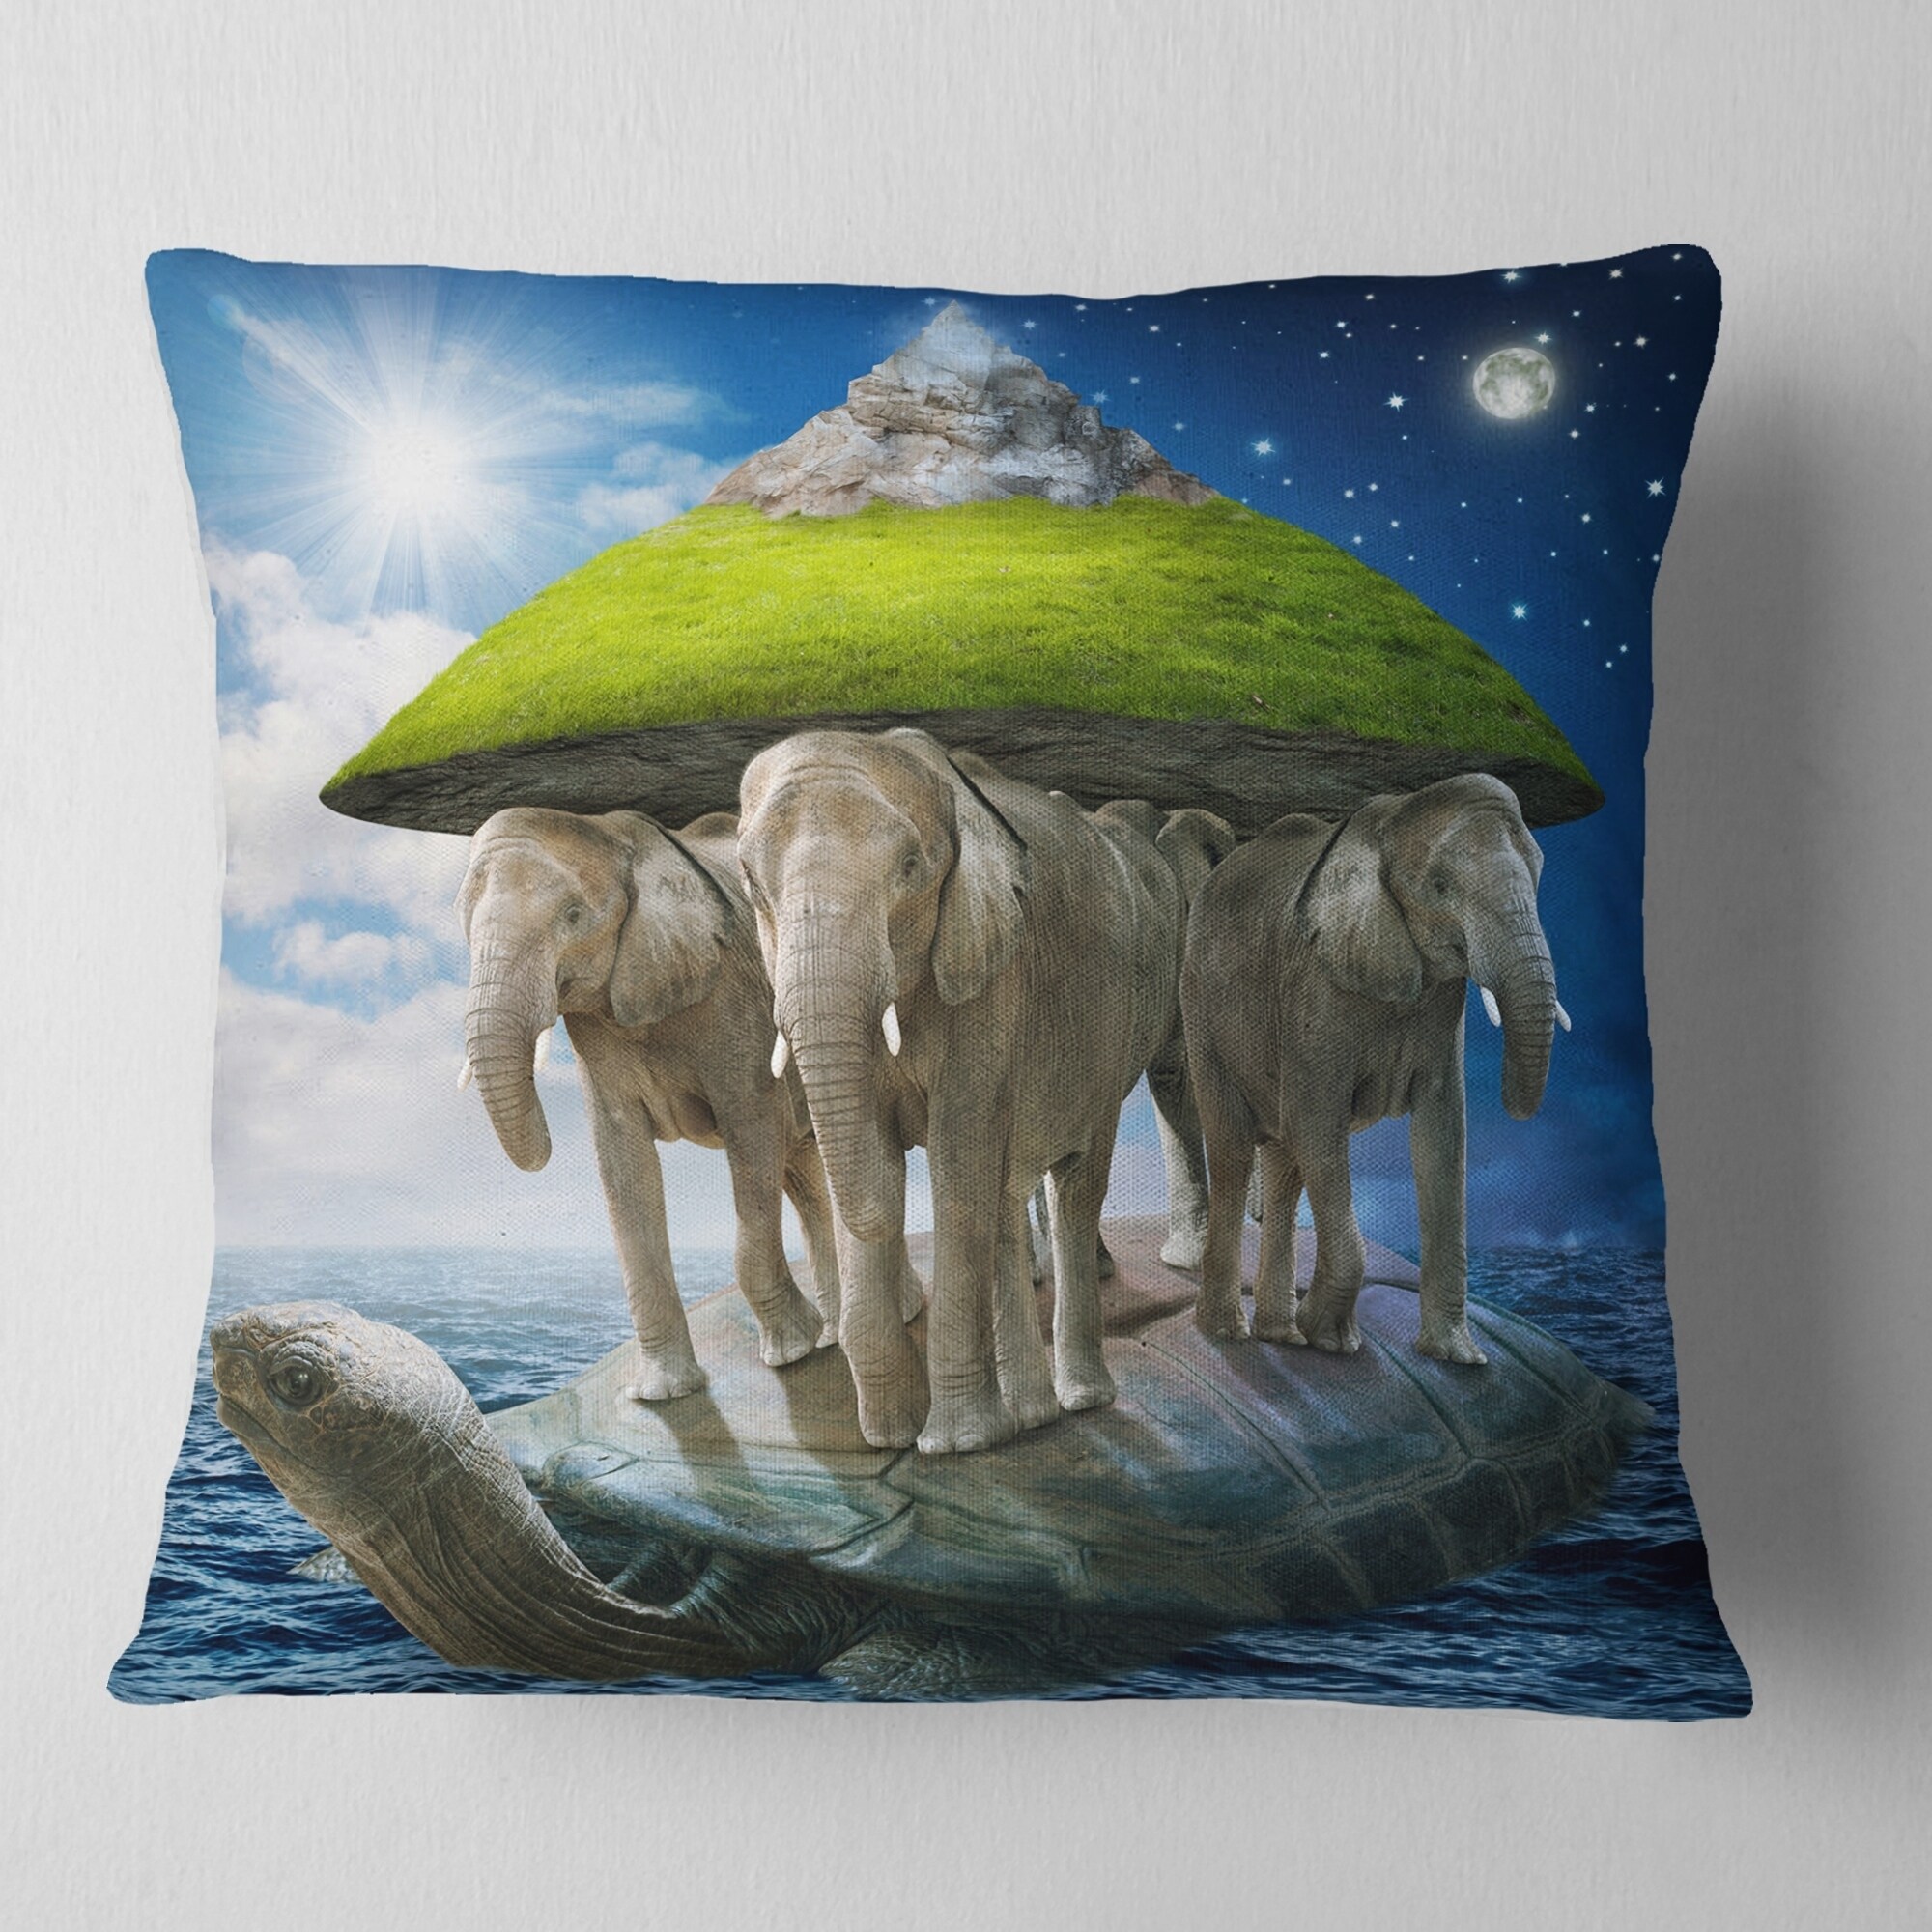 Designart Giant Turtle Carrying Island - Abstract Throw Pillow - 18x18